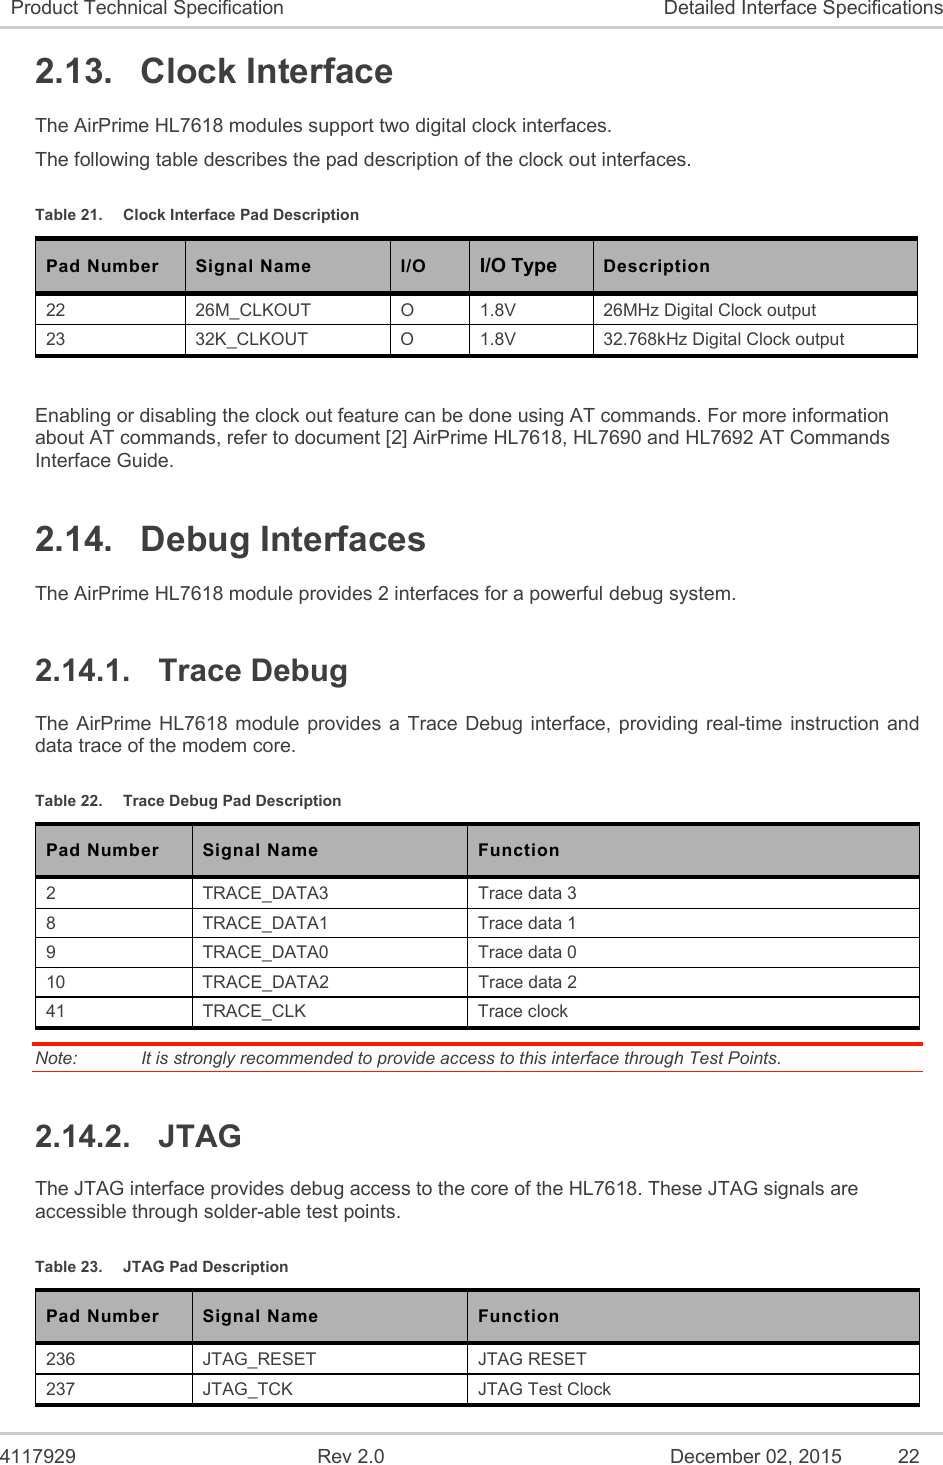  4117929  Rev 2.0  December 02, 2015  22 Product Technical Specification  Detailed Interface Specifications 2.13.  Clock Interface The AirPrime HL7618 modules support two digital clock interfaces. The following table describes the pad description of the clock out interfaces. Table 21.  Clock Interface Pad Description Pad Number Signal Name I/O I/O Type  Description 22  26M_CLKOUT  O  1.8V  26MHz Digital Clock output 23  32K_CLKOUT  O  1.8V  32.768kHz Digital Clock output  Enabling or disabling the clock out feature can be done using AT commands. For more information about AT commands, refer to document [2] AirPrime HL7618, HL7690 and HL7692 AT Commands Interface Guide. 2.14.  Debug Interfaces The AirPrime HL7618 module provides 2 interfaces for a powerful debug system. 2.14.1.  Trace Debug The AirPrime  HL7618  module  provides  a Trace Debug interface, providing real-time instruction and data trace of the modem core. Table 22.  Trace Debug Pad Description Pad Number  Signal Name  Function 2  TRACE_DATA3  Trace data 3 8  TRACE_DATA1  Trace data 1 9  TRACE_DATA0  Trace data 0 10  TRACE_DATA2  Trace data 2 41  TRACE_CLK  Trace clock Note:   It is strongly recommended to provide access to this interface through Test Points. 2.14.2.  JTAG The JTAG interface provides debug access to the core of the HL7618. These JTAG signals are accessible through solder-able test points. Table 23.  JTAG Pad Description Pad Number  Signal Name  Function 236  JTAG_RESET  JTAG RESET 237  JTAG_TCK  JTAG Test Clock 